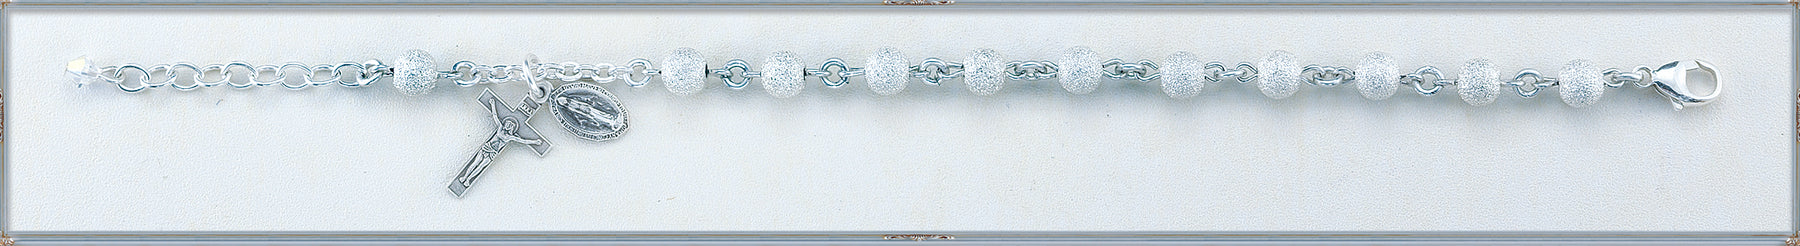 Frosted Round Sterling Silver Bracelet